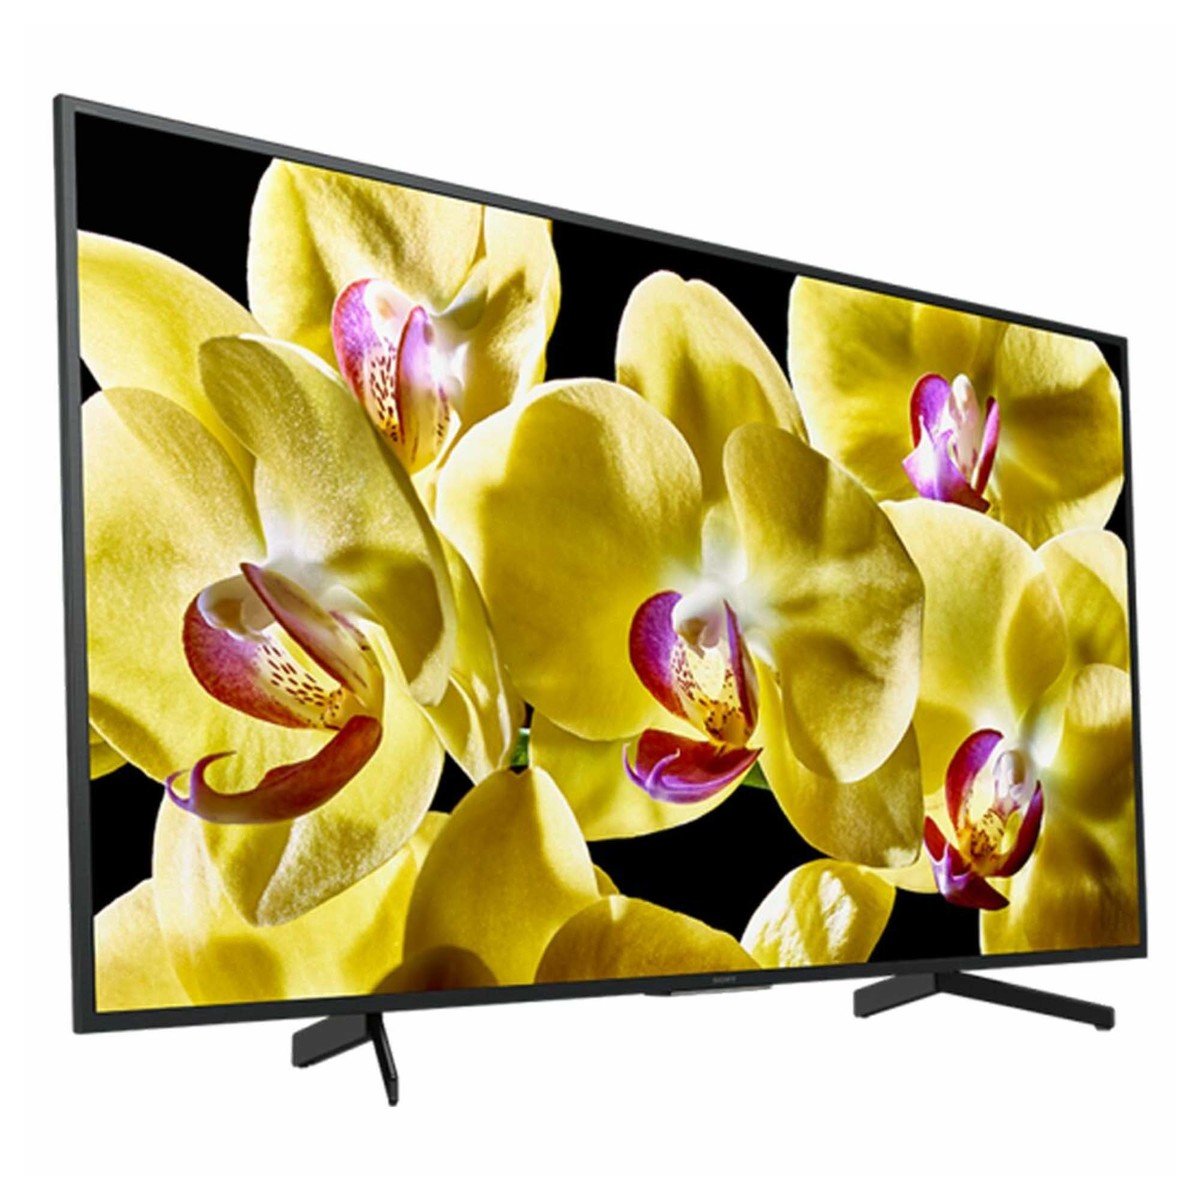 Sony 4K Ultra HD Android Smart LED TV KD49X8000G 49"